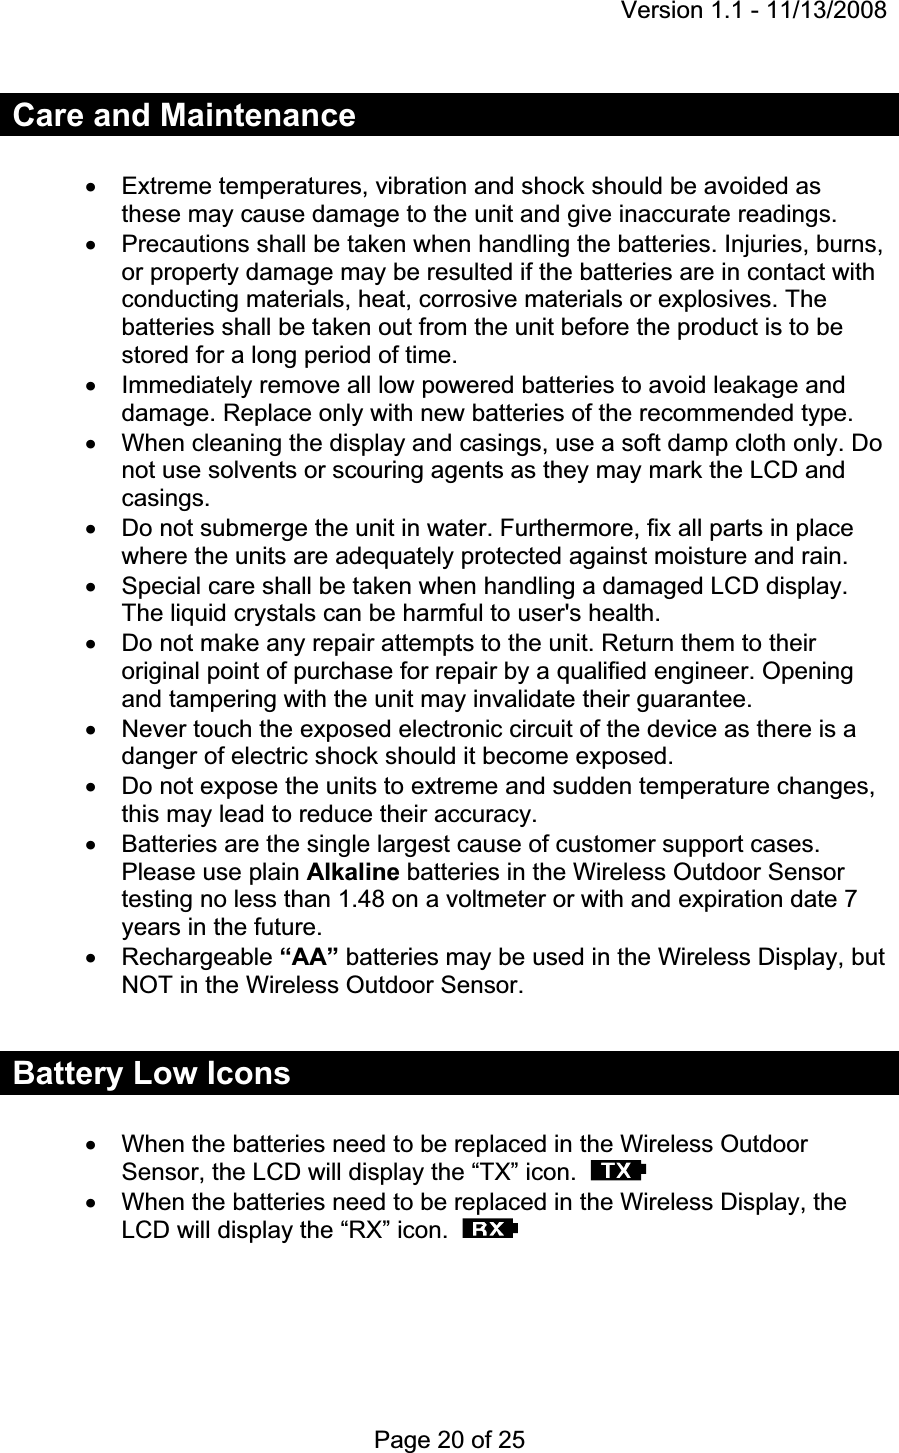 Version 1.1 - 11/13/2008 Page 20 of 25 Care and Maintenance x  Extreme temperatures, vibration and shock should be avoided as these may cause damage to the unit and give inaccurate readings. x  Precautions shall be taken when handling the batteries. Injuries, burns, or property damage may be resulted if the batteries are in contact with conducting materials, heat, corrosive materials or explosives. The batteries shall be taken out from the unit before the product is to be stored for a long period of time. x  Immediately remove all low powered batteries to avoid leakage and damage. Replace only with new batteries of the recommended type. x  When cleaning the display and casings, use a soft damp cloth only. Do not use solvents or scouring agents as they may mark the LCD and casings. x  Do not submerge the unit in water. Furthermore, fix all parts in place where the units are adequately protected against moisture and rain. x  Special care shall be taken when handling a damaged LCD display. The liquid crystals can be harmful to user&apos;s health. x  Do not make any repair attempts to the unit. Return them to their original point of purchase for repair by a qualified engineer. Opening and tampering with the unit may invalidate their guarantee. x  Never touch the exposed electronic circuit of the device as there is a danger of electric shock should it become exposed. x  Do not expose the units to extreme and sudden temperature changes, this may lead to reduce their accuracy. x  Batteries are the single largest cause of customer support cases. Please use plain Alkaline batteries in the Wireless Outdoor Sensor testing no less than 1.48 on a voltmeter or with and expiration date 7 years in the future.x Rechargeable “AA” batteries may be used in the Wireless Display, but NOT in the Wireless Outdoor Sensor. Battery Low Icons x  When the batteries need to be replaced in the Wireless Outdoor Sensor, the LCD will display the “TX” icon.x  When the batteries need to be replaced in the Wireless Display, the LCD will display the “RX” icon.  